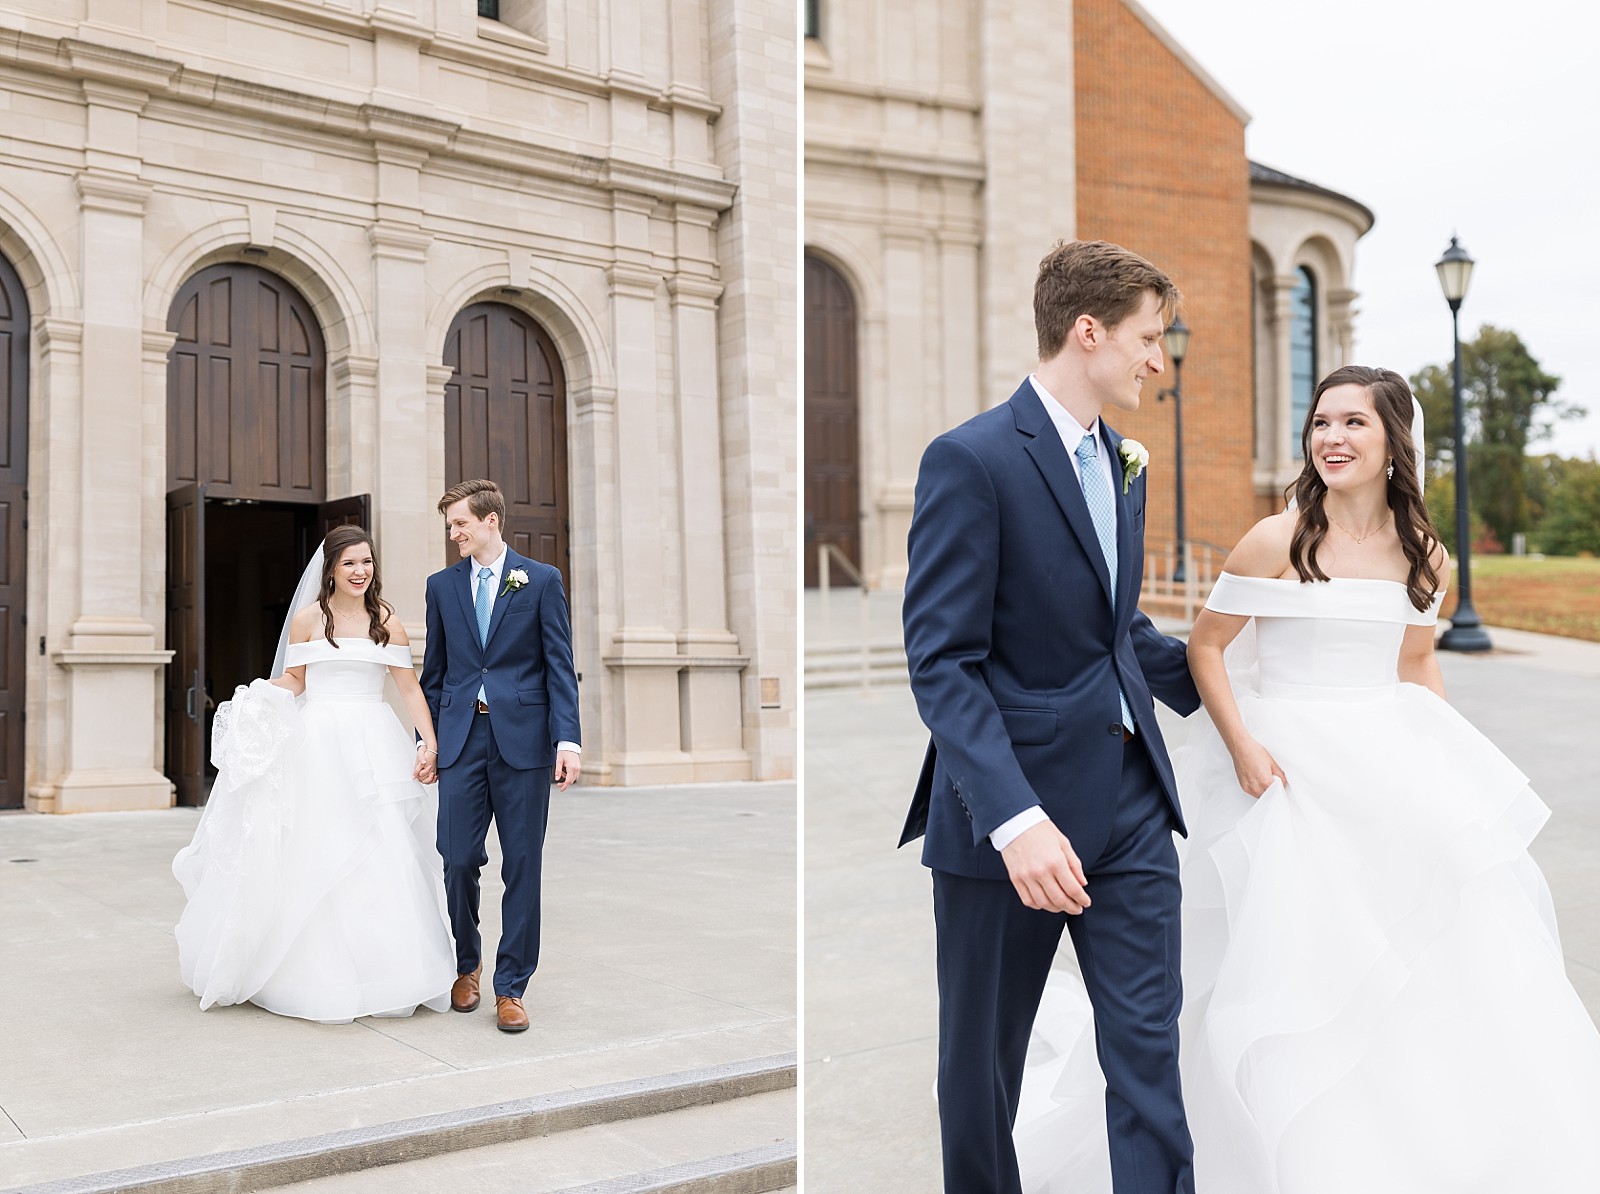 Bride and groom walking out of church together | bride and groom church photos  | Fall Wedding at The Meadows in Raleigh | Raleigh NC Wedding Photographer